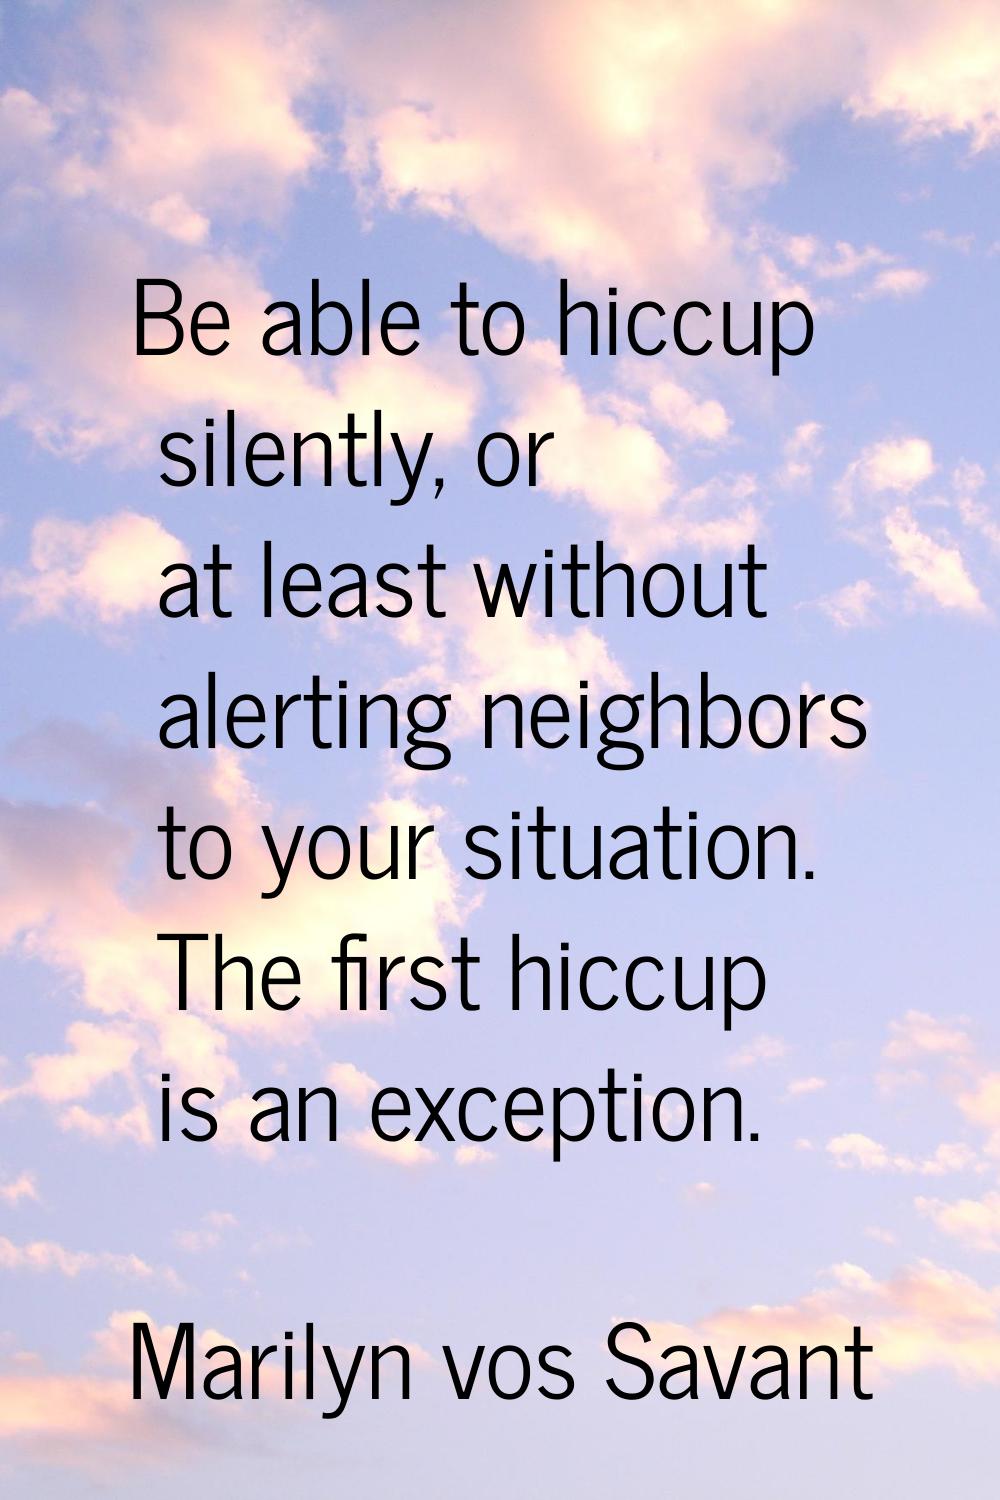 Be able to hiccup silently, or at least without alerting neighbors to your situation. The first hic